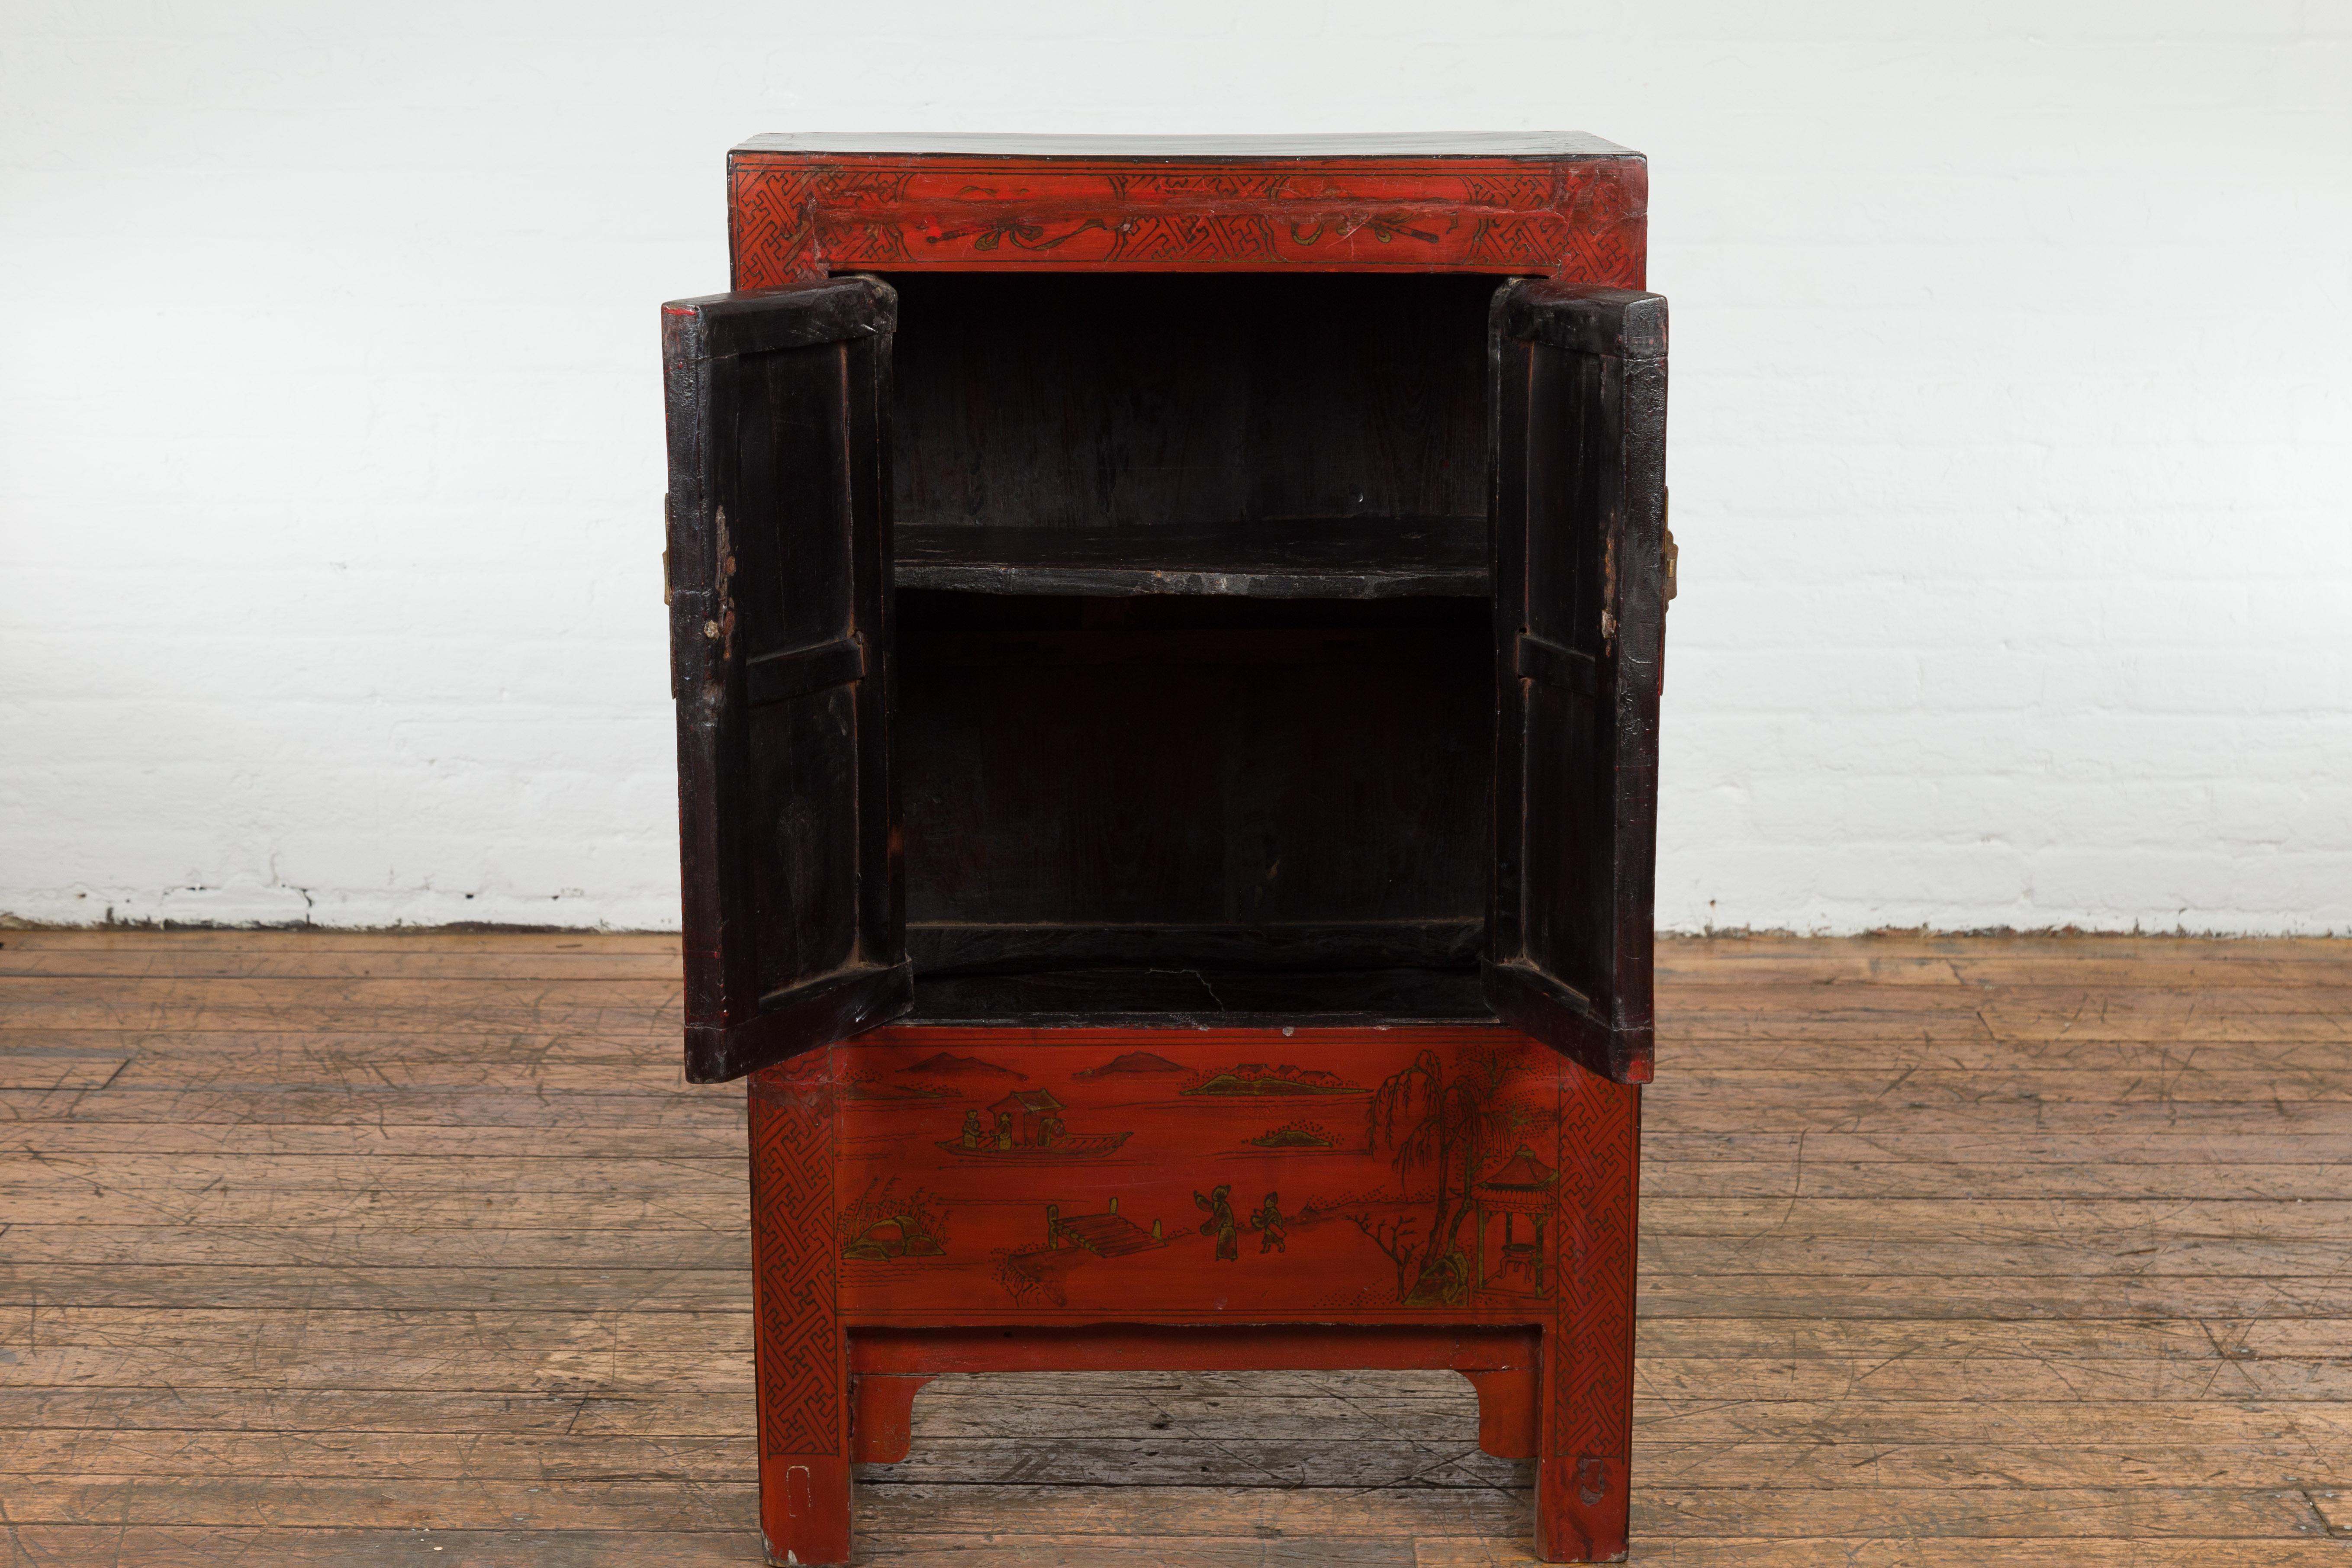 Chinese Qing Dynasty Period Red Lacquer Bedside Cabinet with Hand-Painted Décor For Sale 9